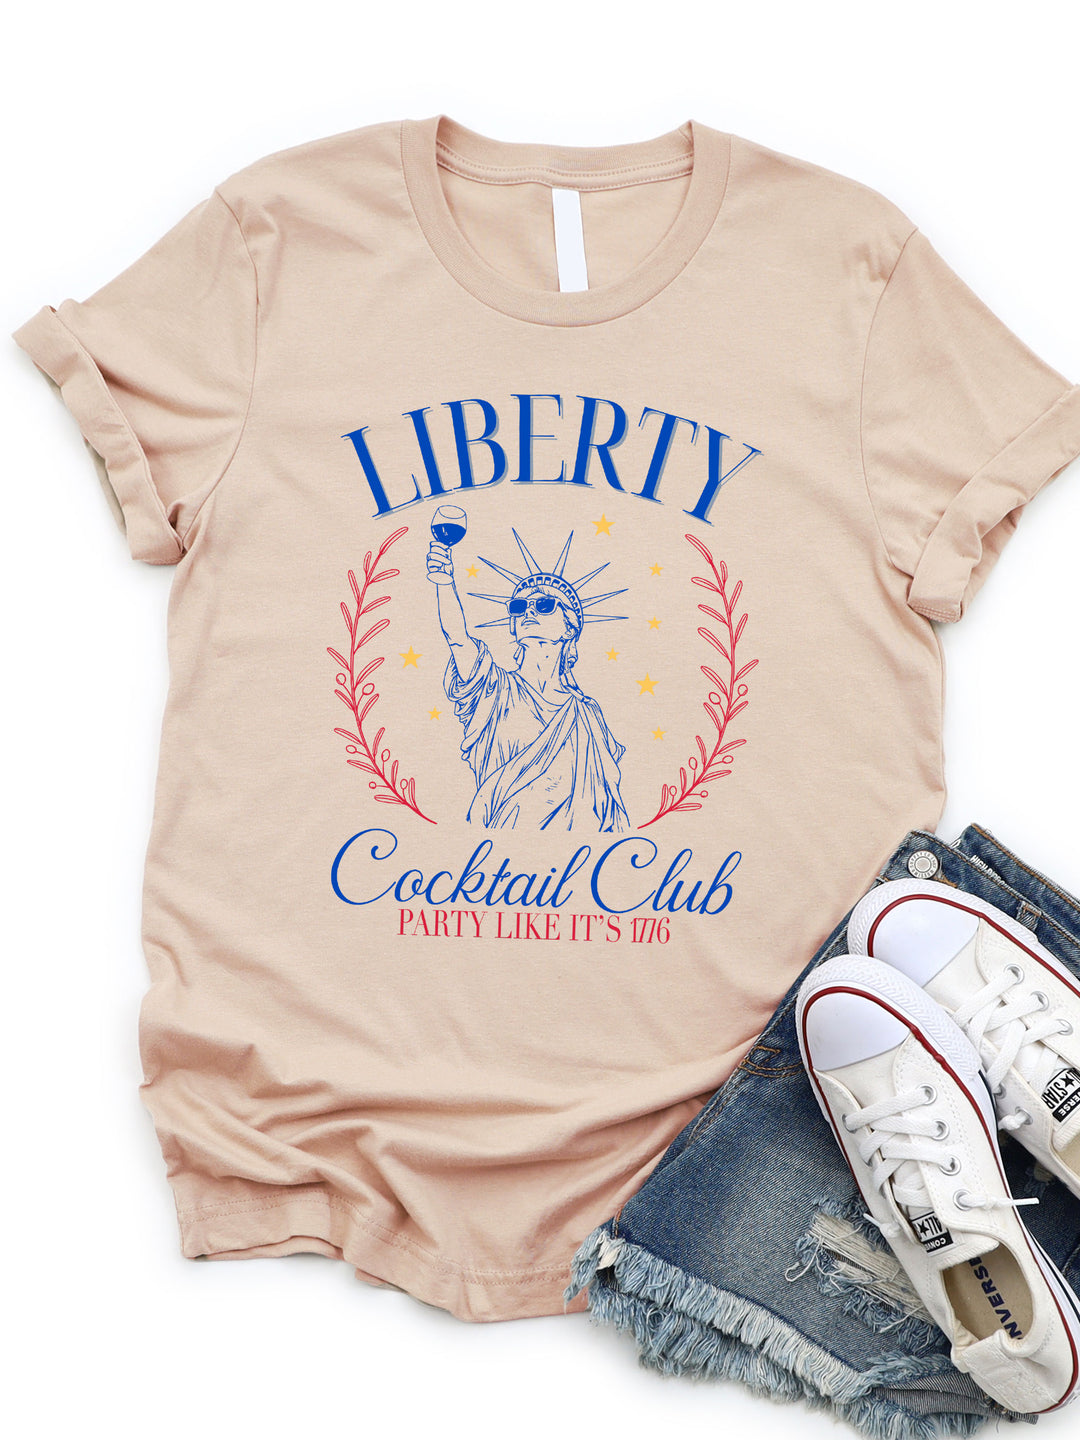 Liberty Cocktail Club Graphic Tee